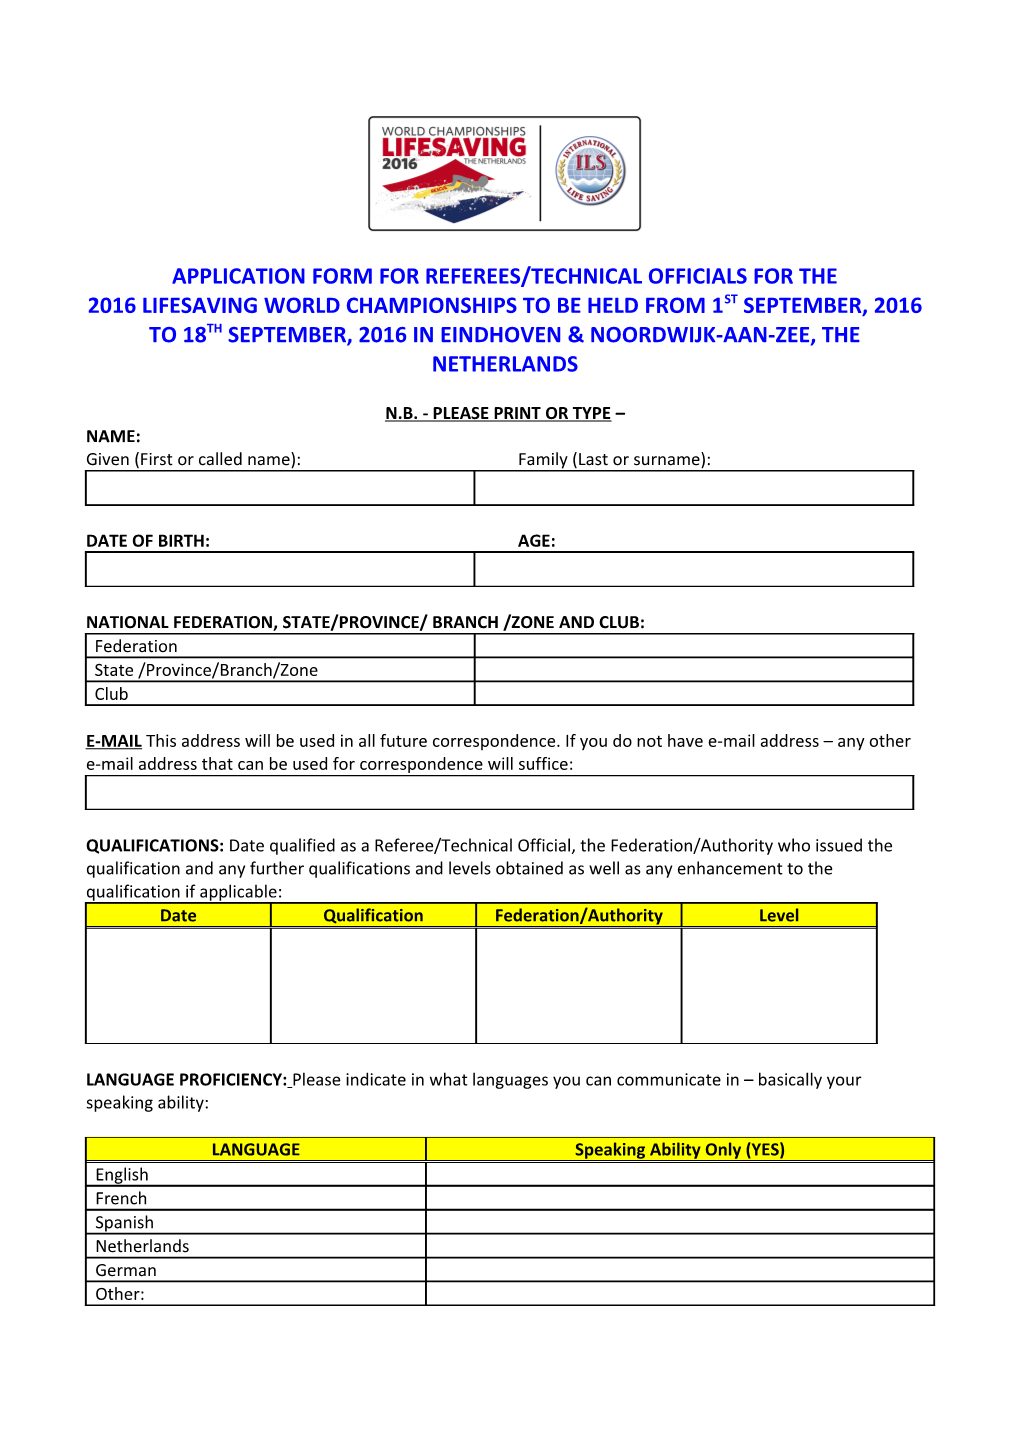 Application Form for Referees/Technical Officials for The